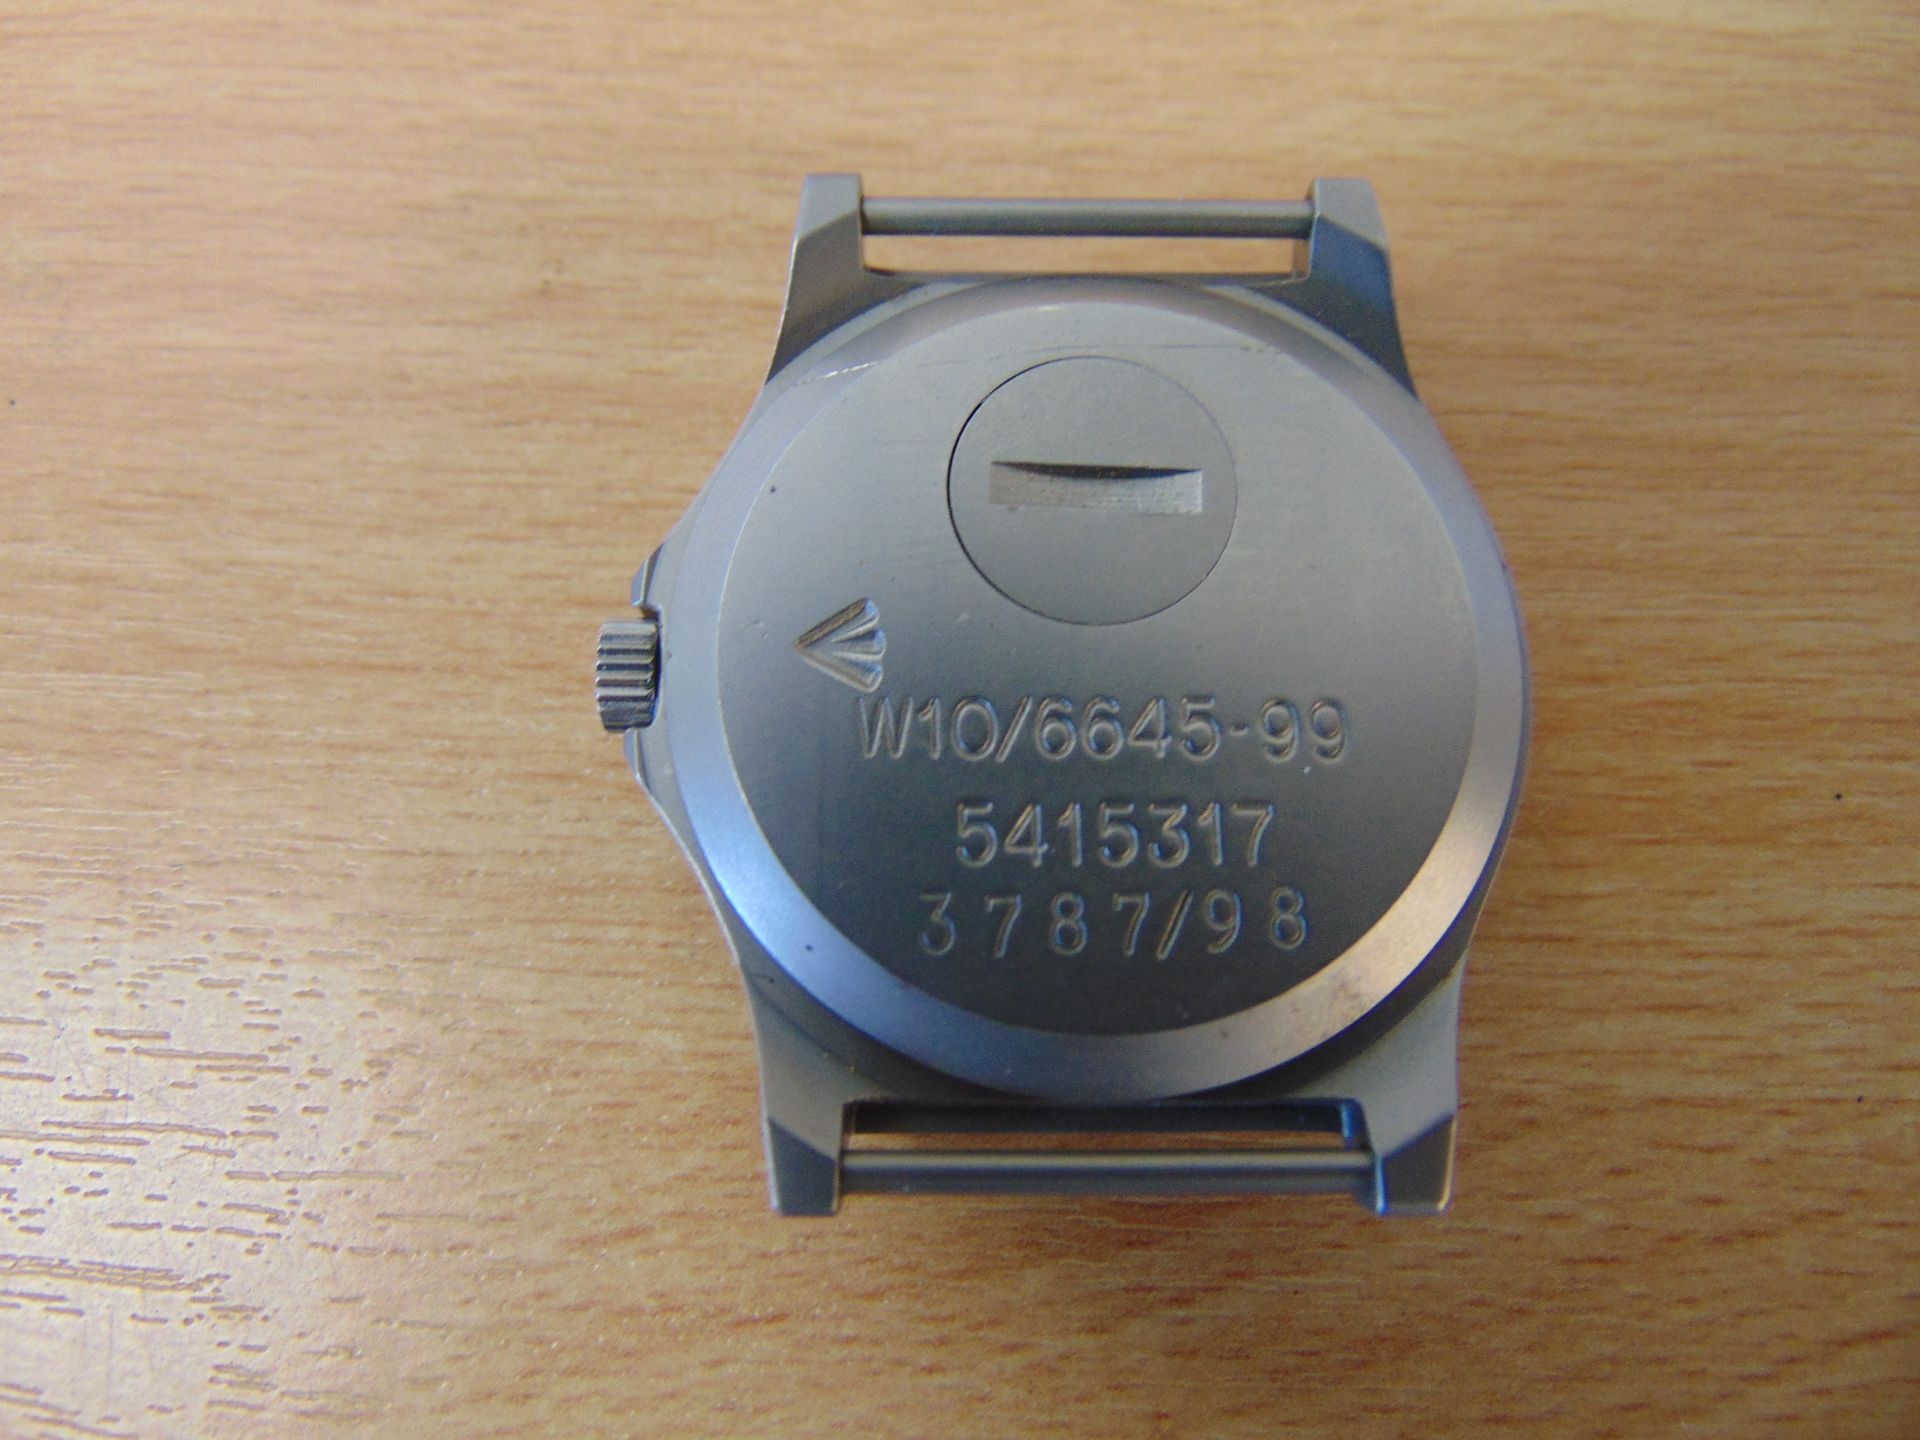 V.NICE CWC W10 British Army Service Watch Nato Marks Date 1998, New Battery / Strap - Image 3 of 4